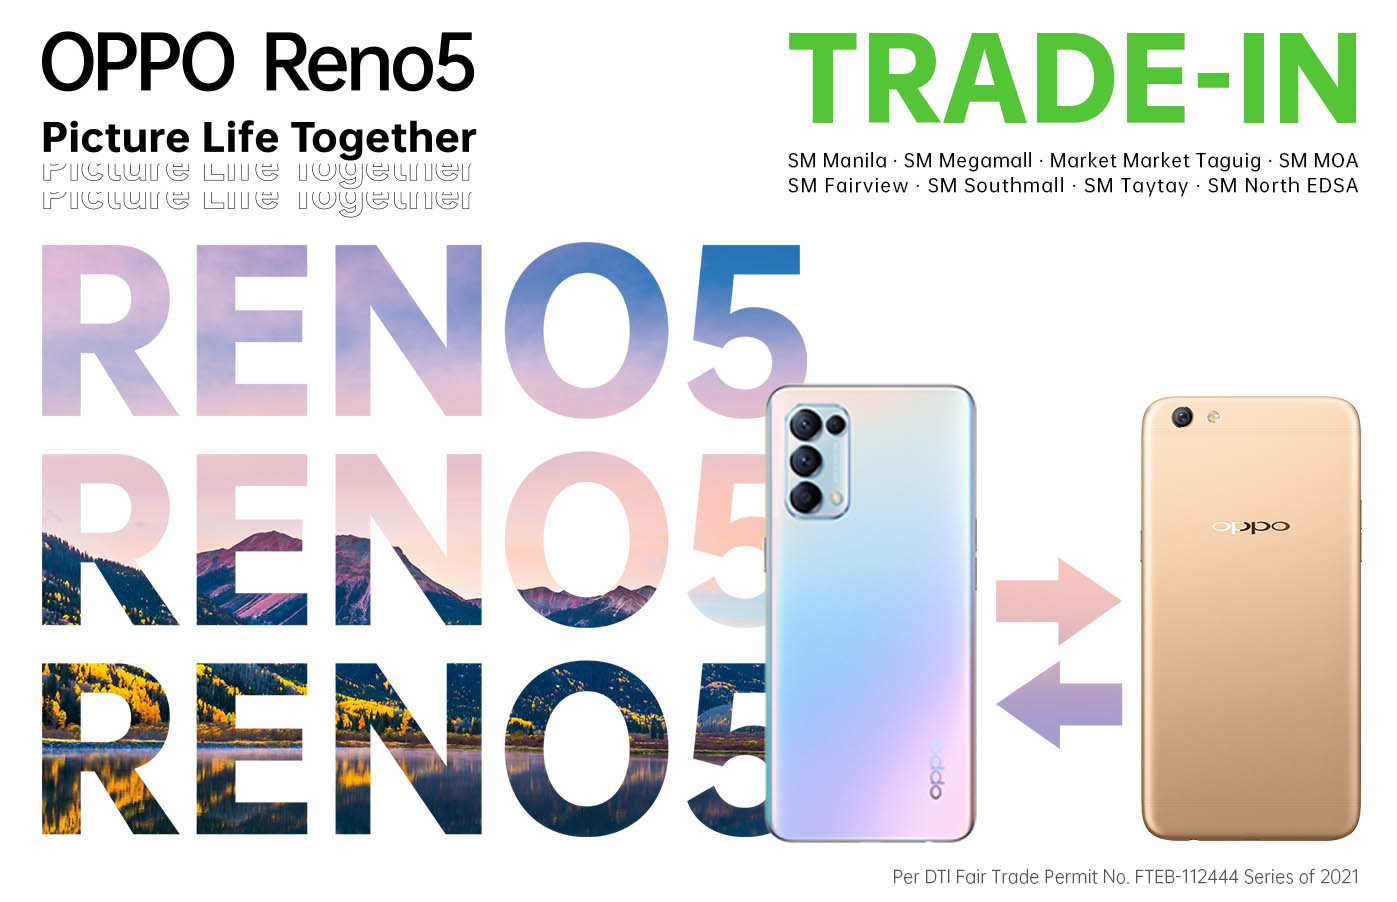 OPPO F Series users can avail the new Reno5 4G via exclusive trade-in program on February 27